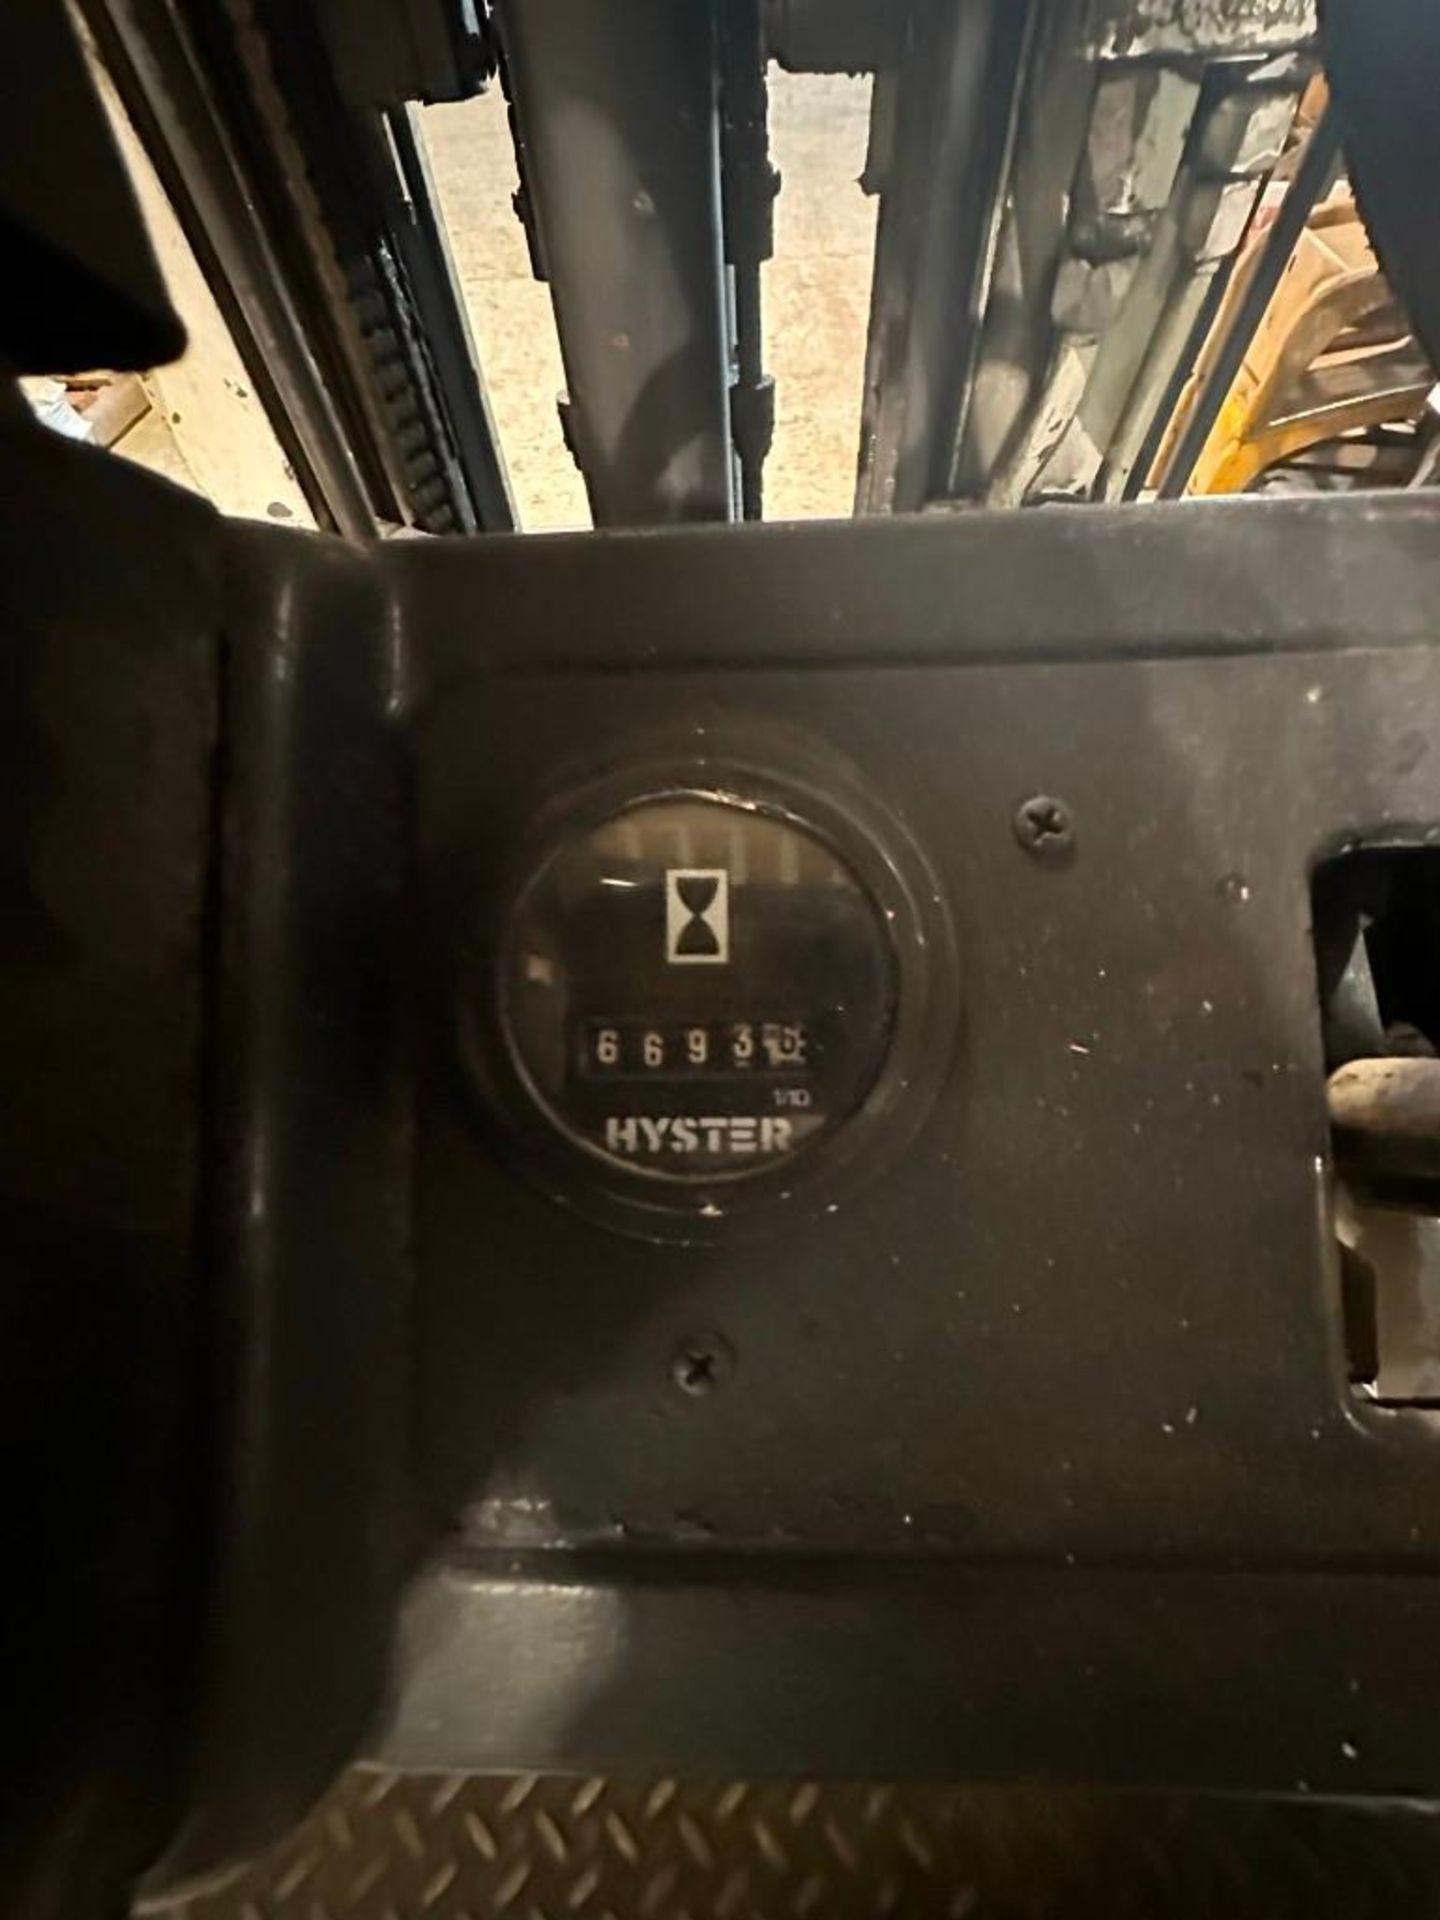 Hyster 4000lb forklift, 3 stage, hours: 6693, S/N: 0002002125W, operates but needs starter replaced - Image 11 of 16